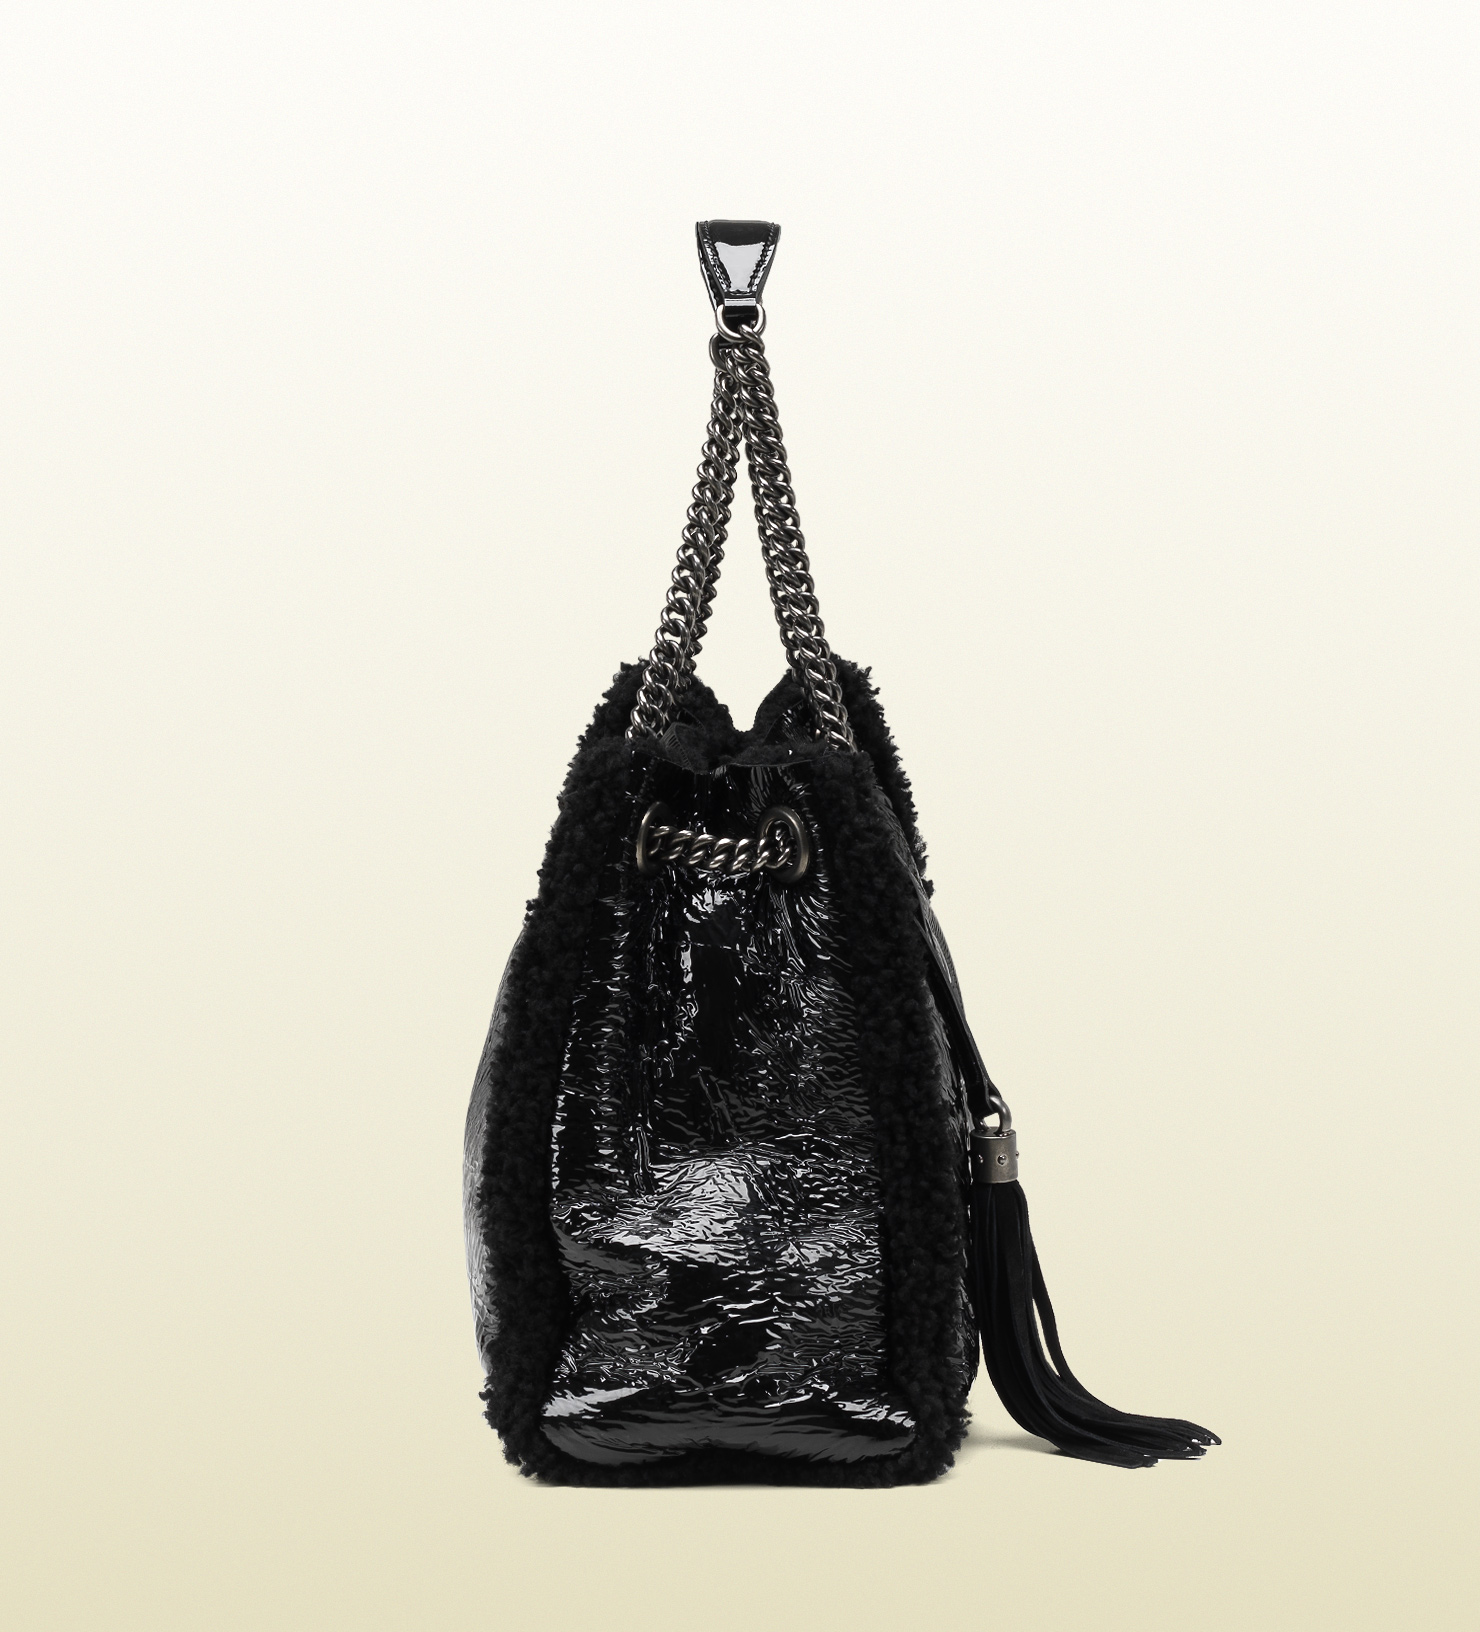 Gucci Soho Crushed Patent Leather Shoulder Bag in Black - Lyst